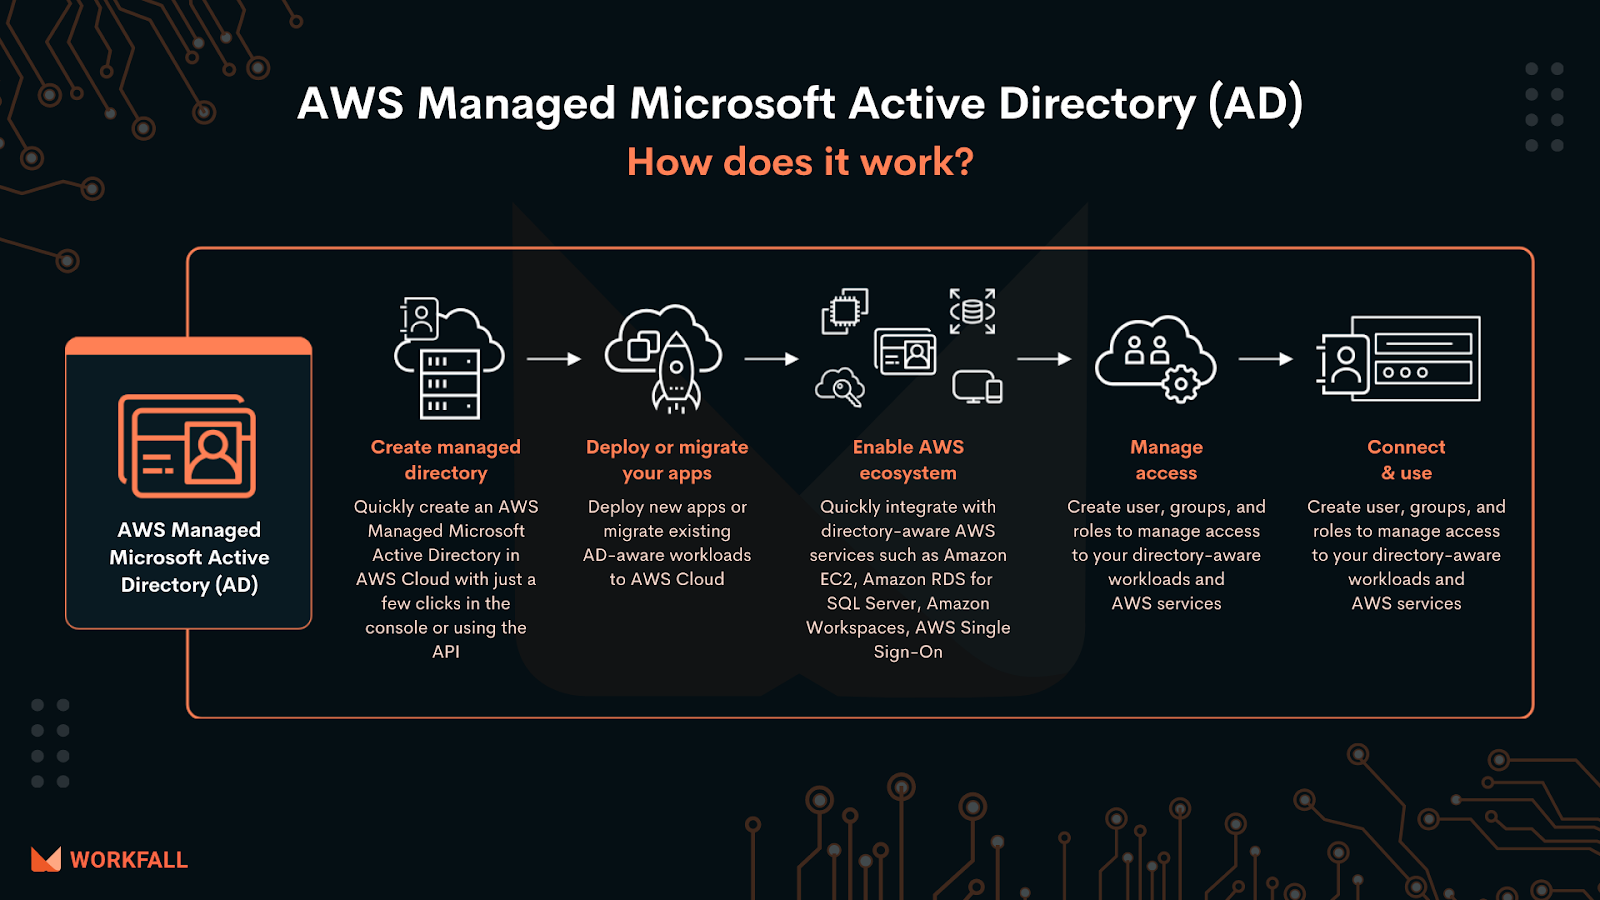 AWS Managed Microsoft Active Directory